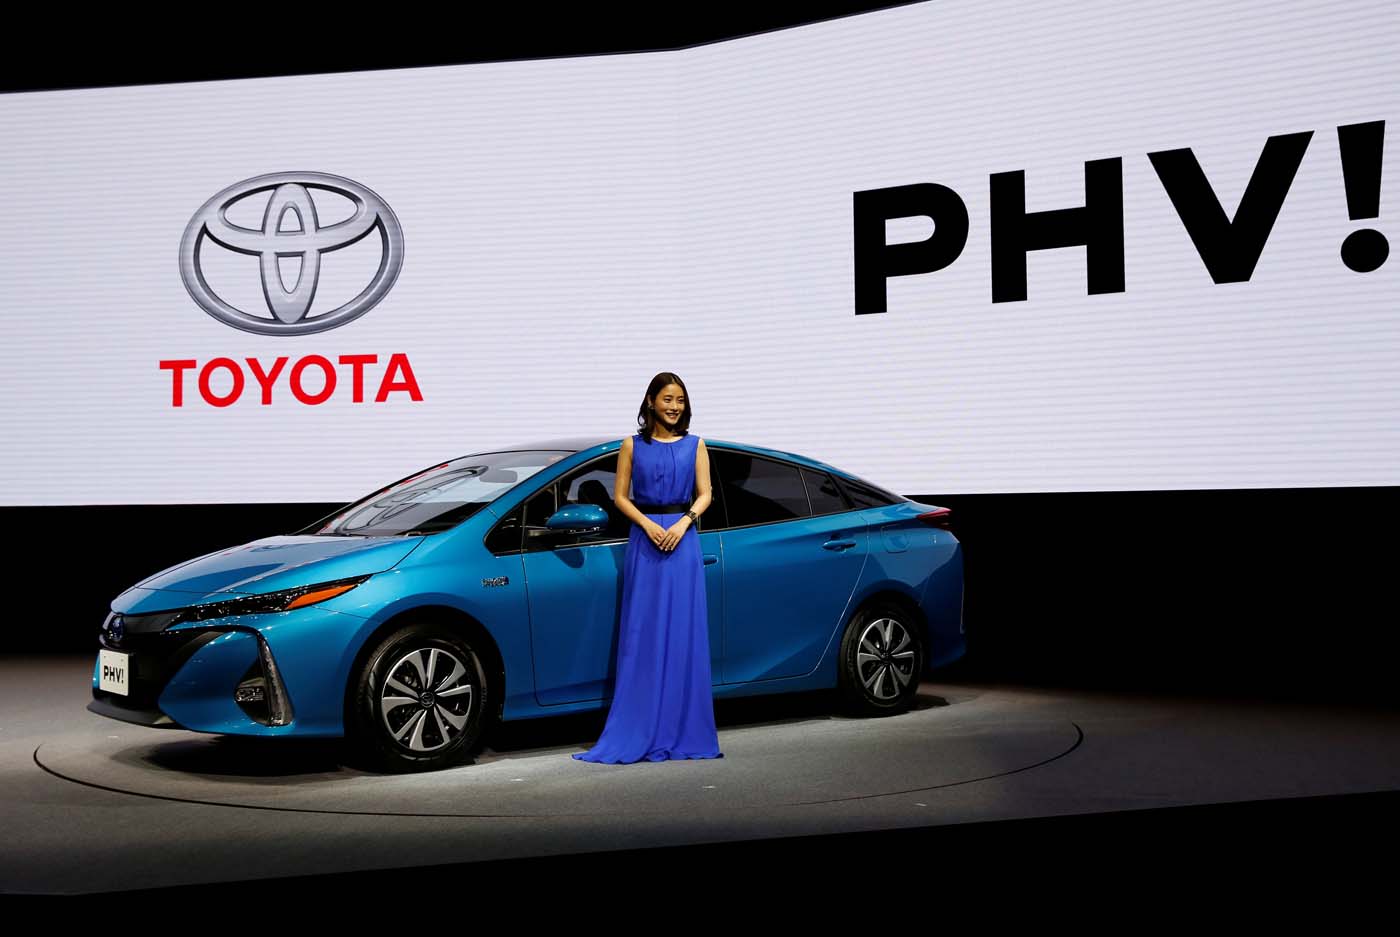 Japanese actress Satomi Ishihara poses next to Toyota Motor Corp.' Prius PHV Plug-in-Hybrid vehicle, also known as Prius Prime in the U.S., during an event to mark the launch of the car in Japan, in Tokyo, Japan February 15, 2017. REUTERS/Issei Kato